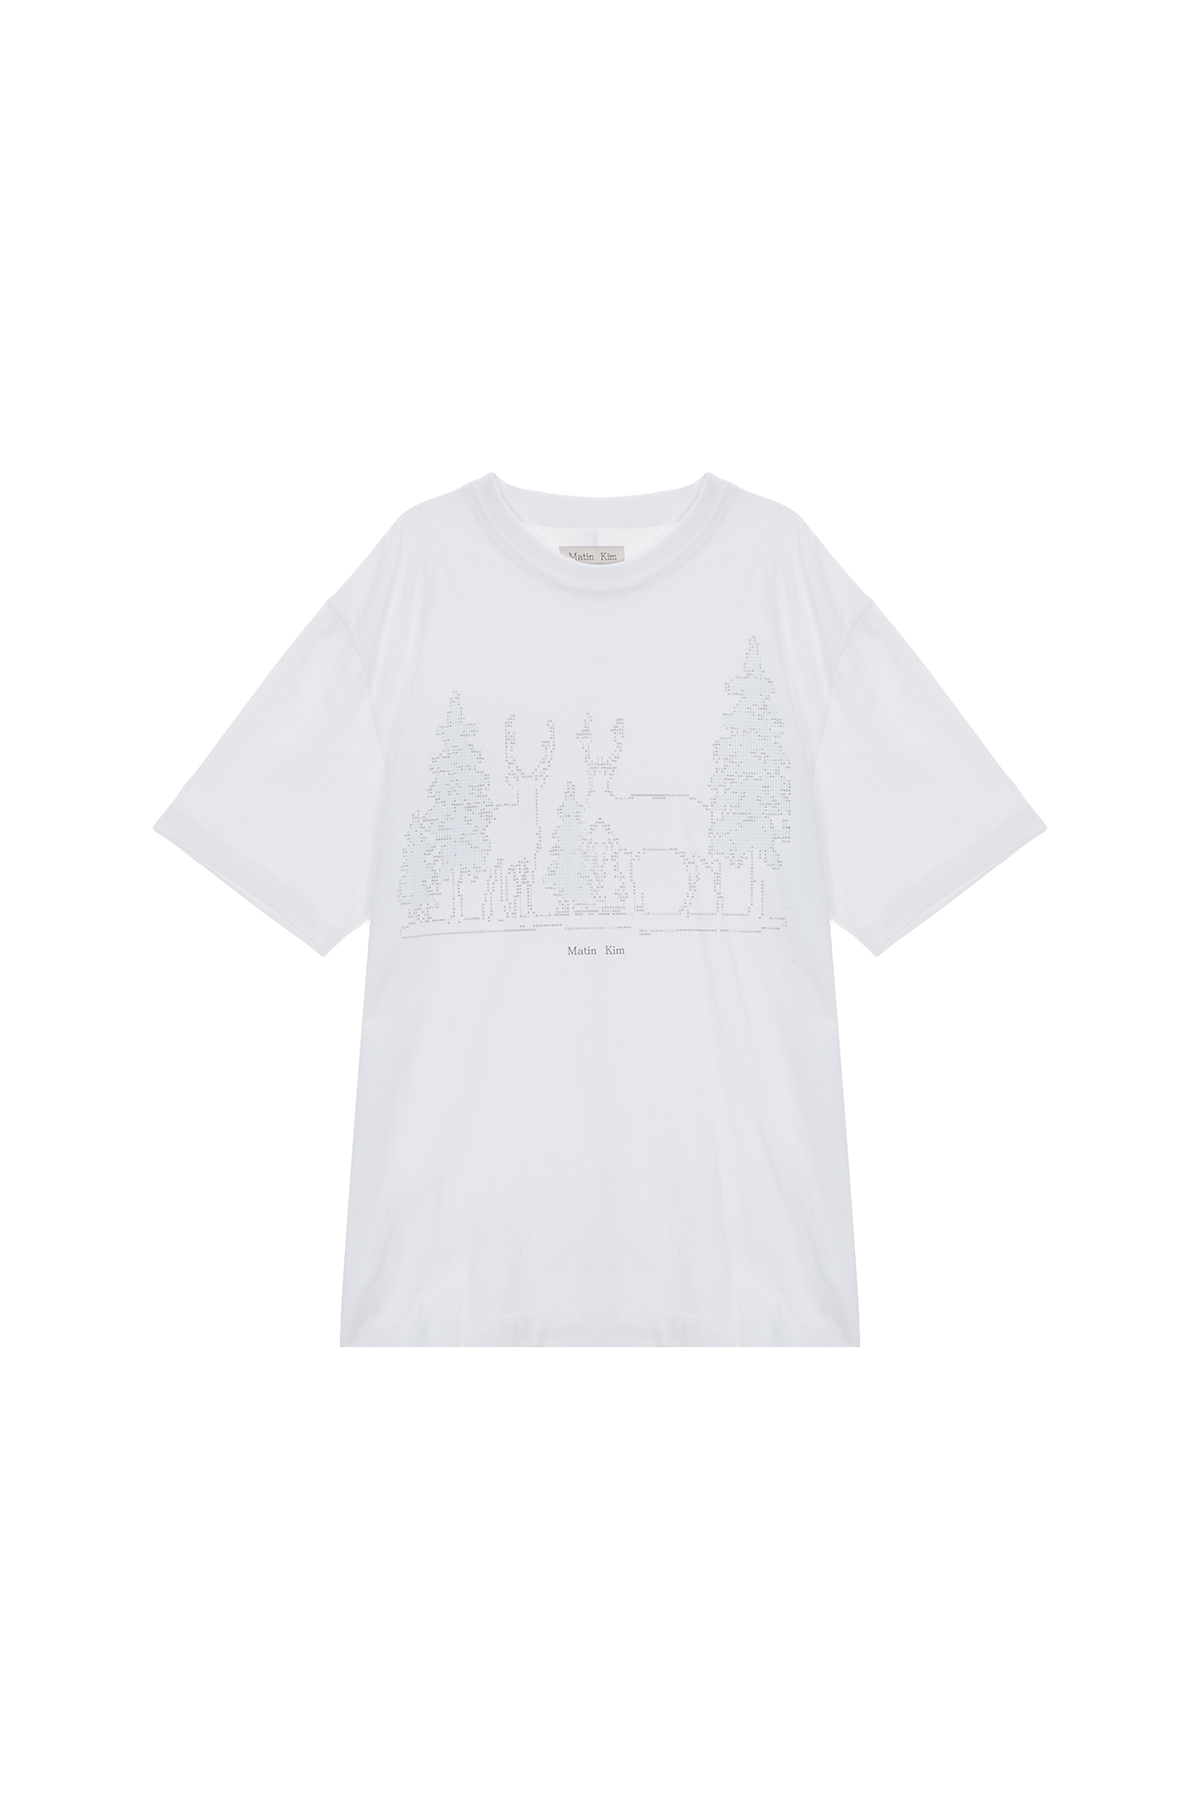 DEER GRAPHIC TOP IN WHITE